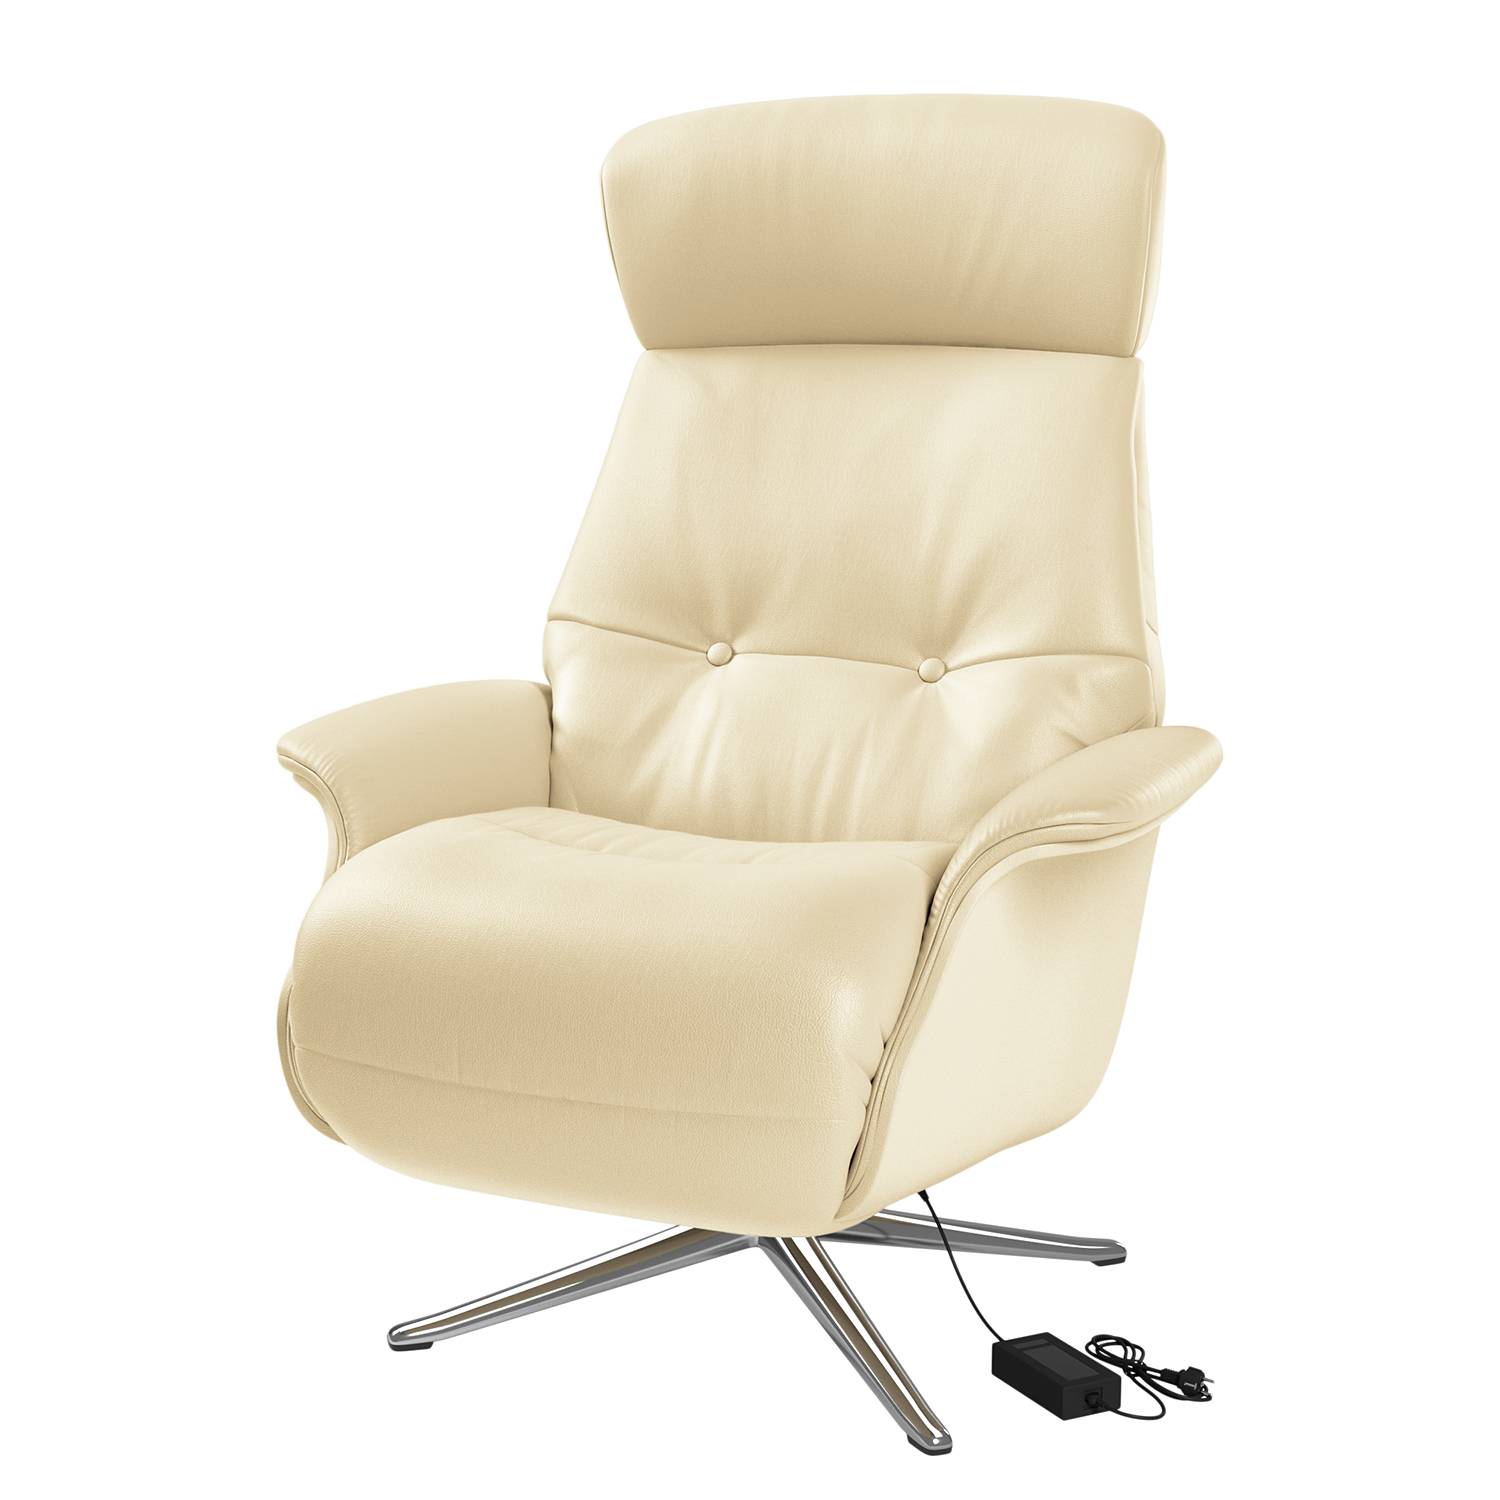 Image of Fauteuil relax Anderson VI 000000001000131482